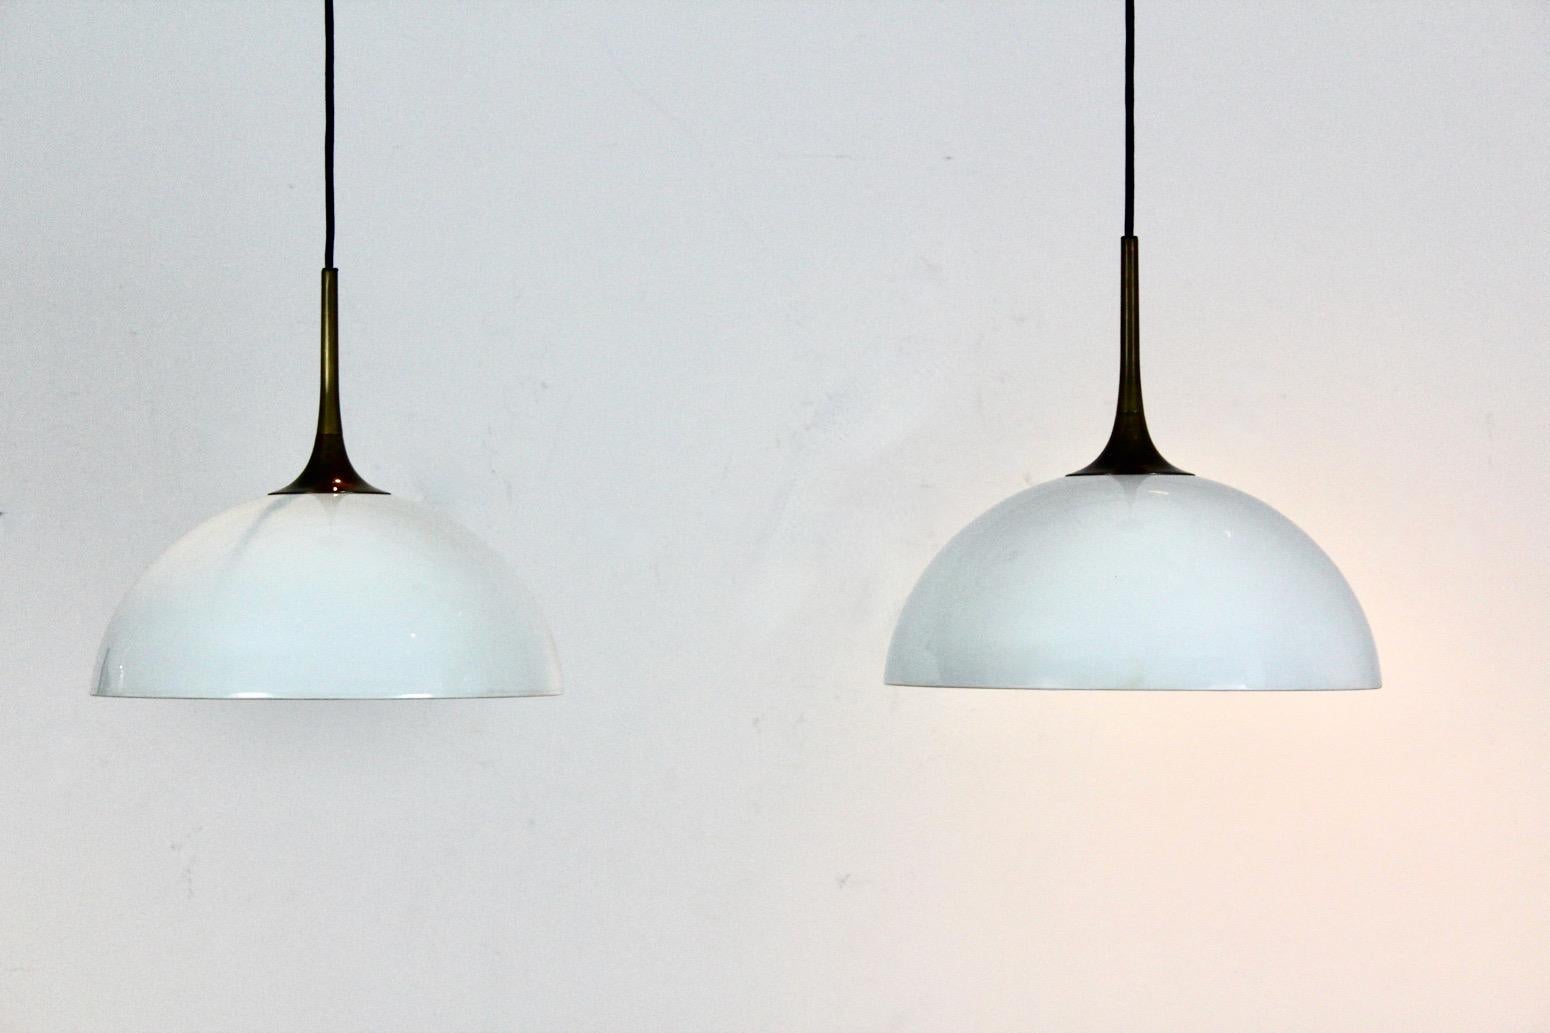 Elegant Pair of Brass and White-Opal Glass Pendant Lights by Florian Schulz For Sale 5